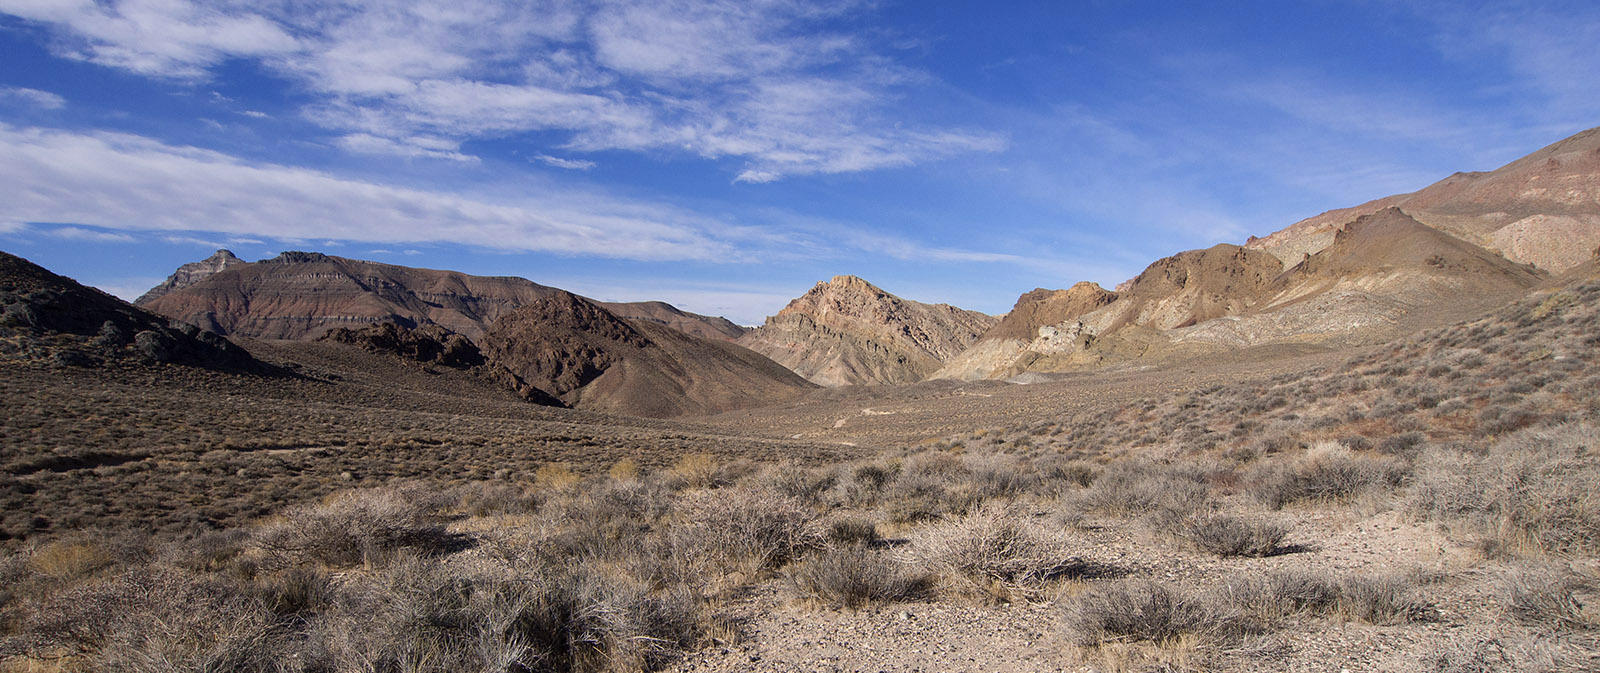 Titus Canyon Road access looking West.  Multiple sedimentary and igneous strata are shown as in a similar photo in Miller and Wright, 2015 (photo 41, reference 4).  Details of strata and formations are shown and described in the following photographs.